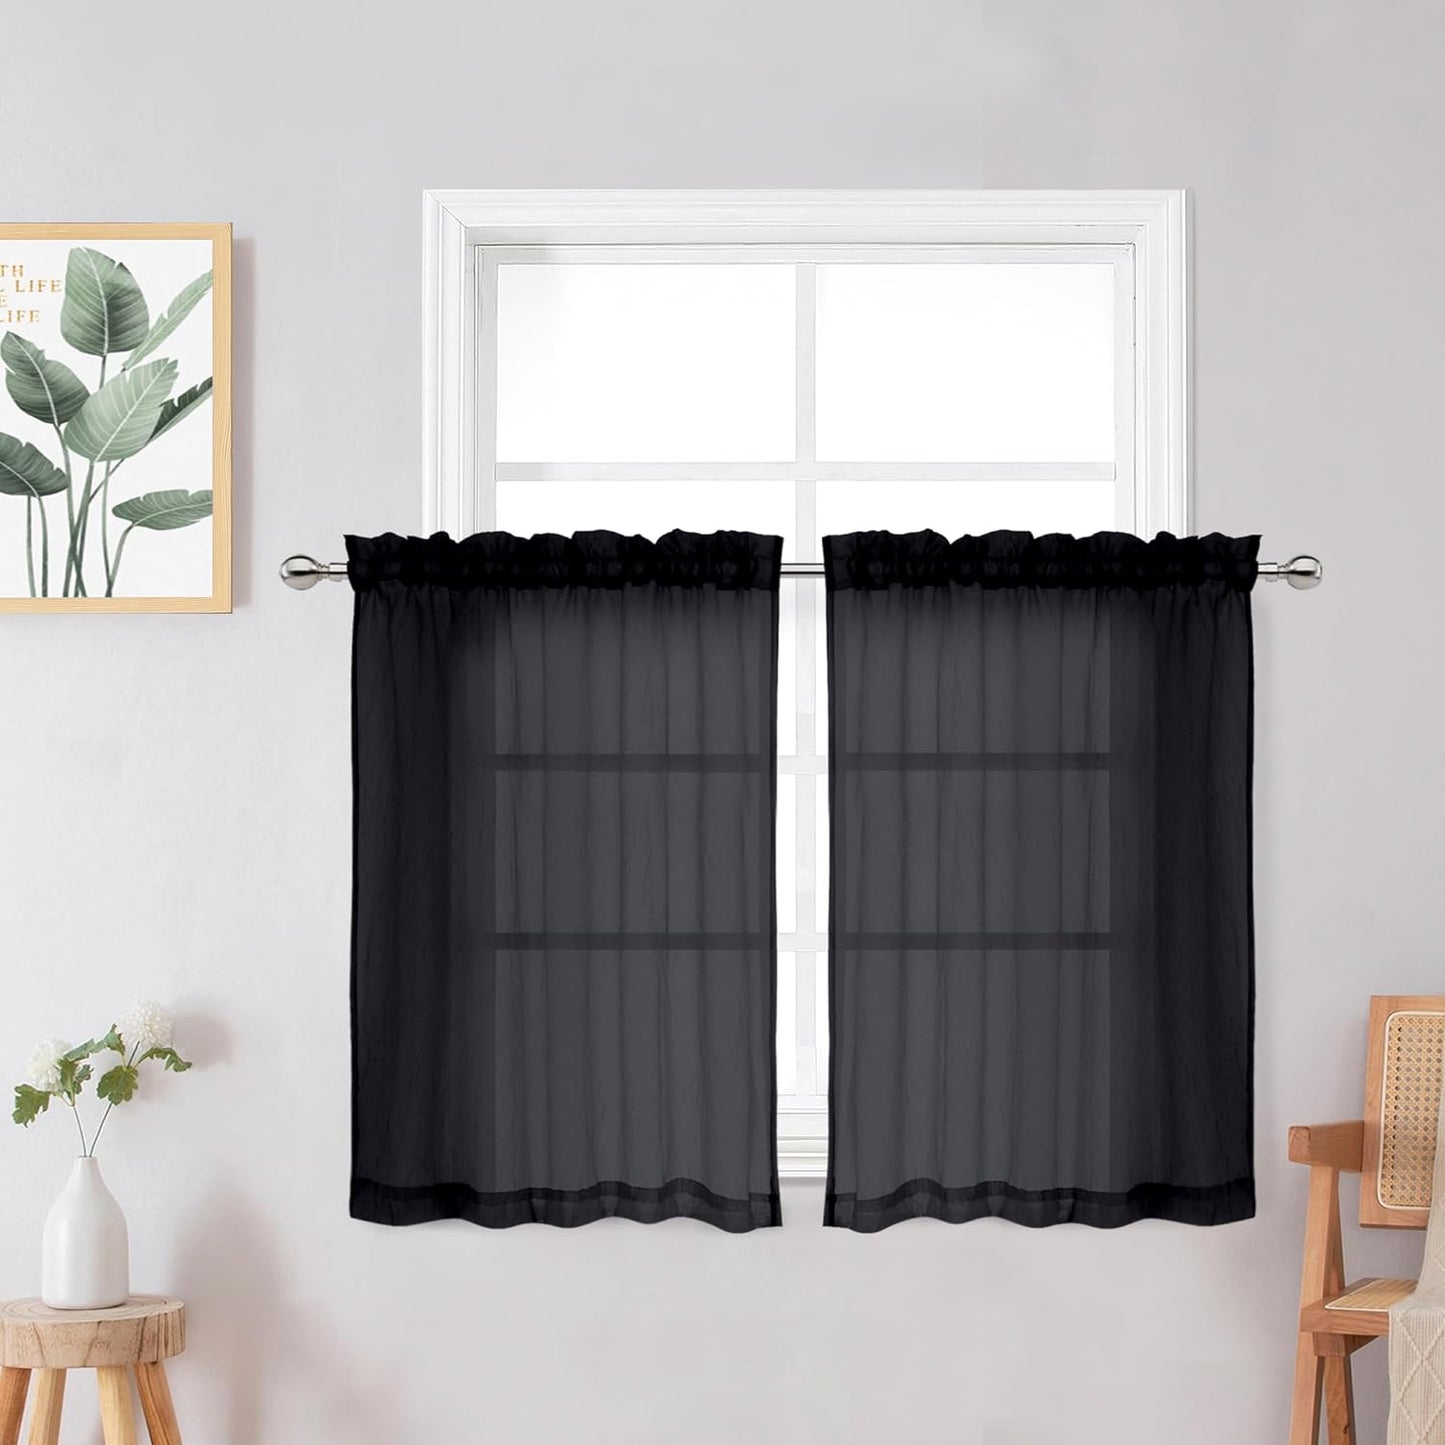 Crushed Sheer White Curtains 63 Inch Length 2 Panels, Light Filtering Solid Crinkle Voile Short Sheer Curtian for Bedroom Living Room, Each 42Wx63L Inches  Chyhomenyc Black 28 W X 36 L 